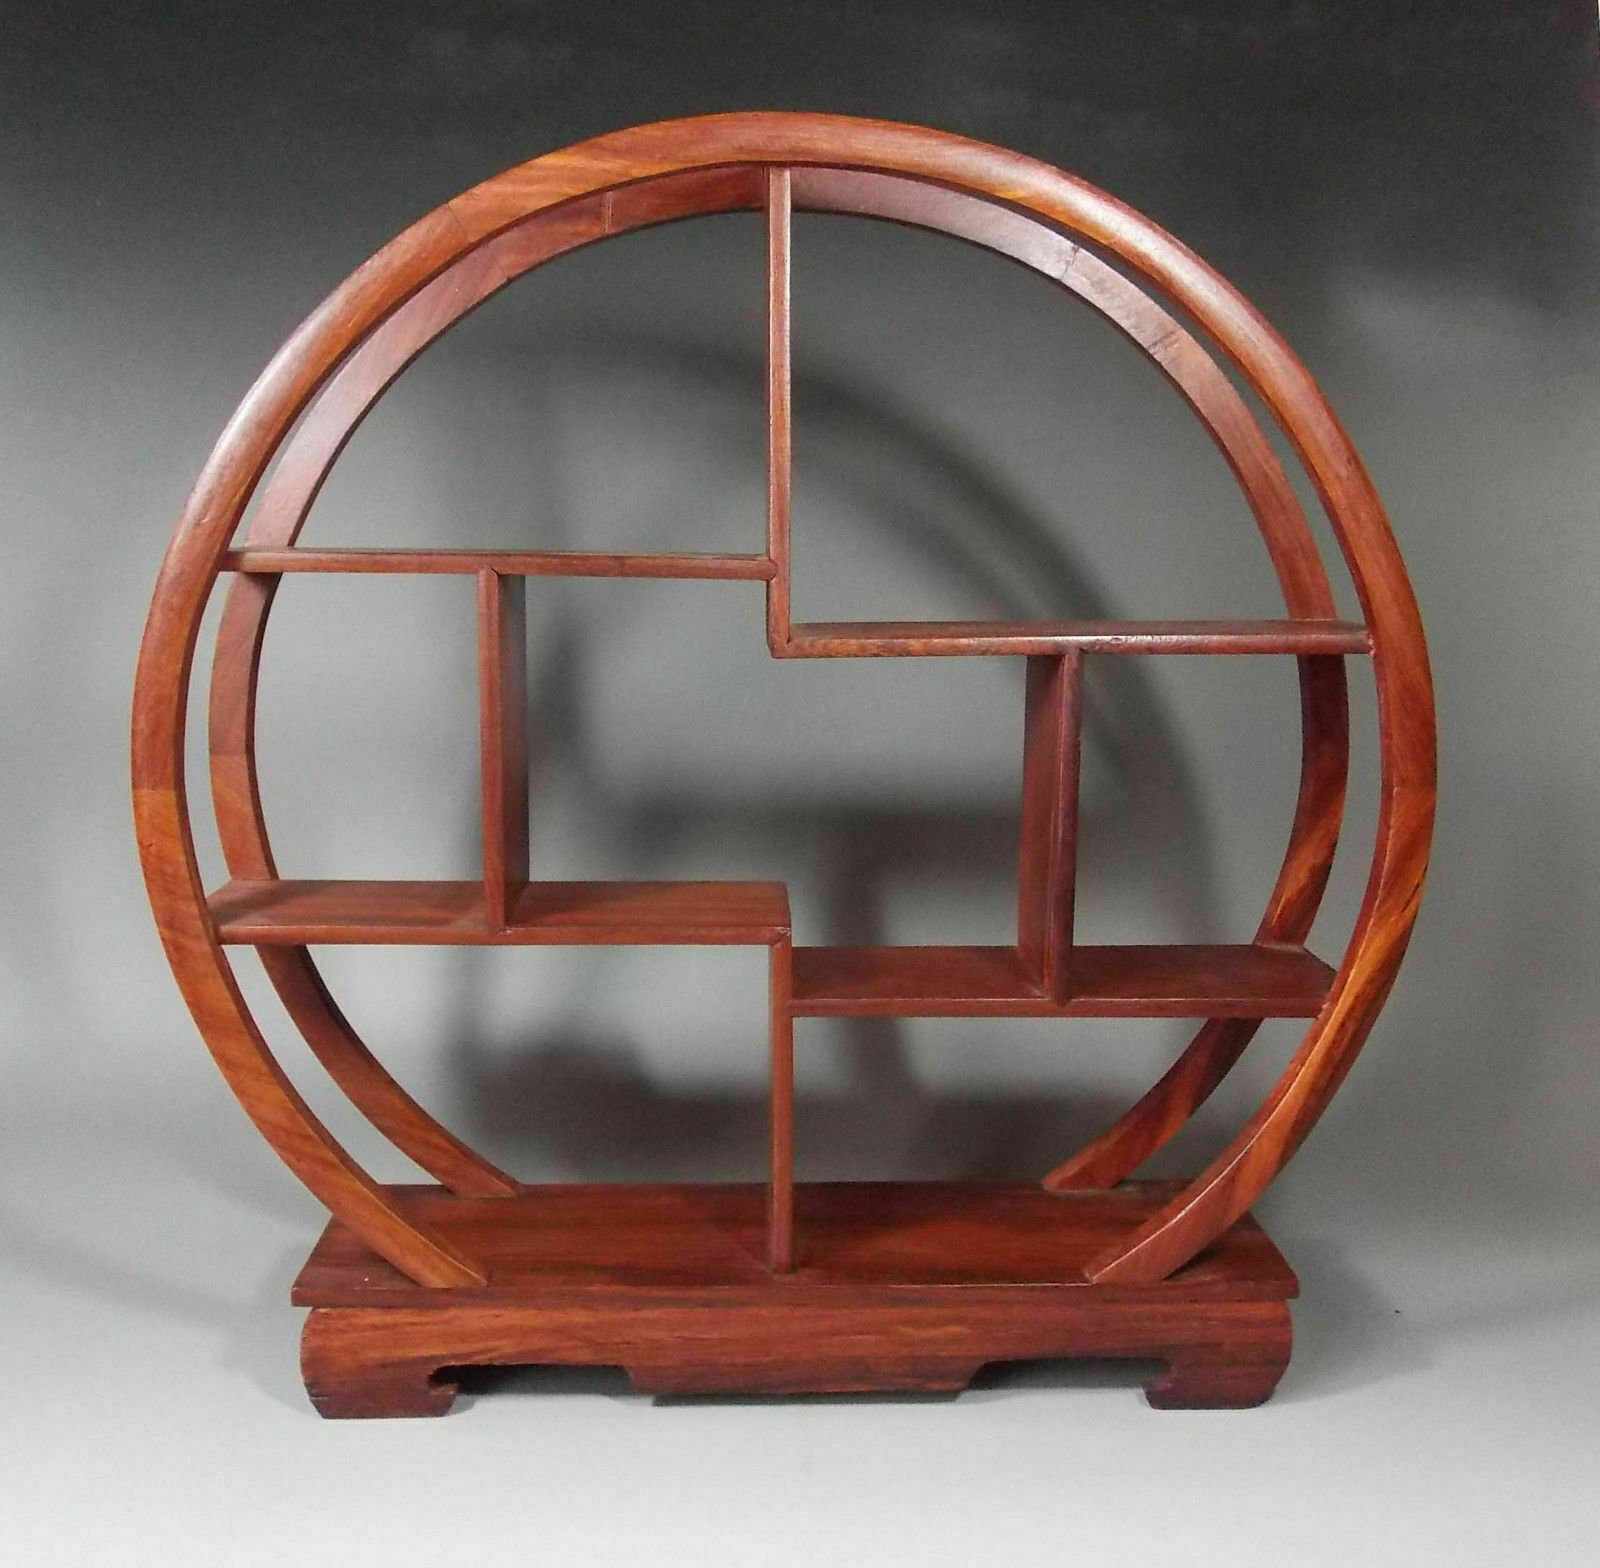 29.2 Cm Solid Rosewood Display Shelf for Display Rack Small Decorative Screen